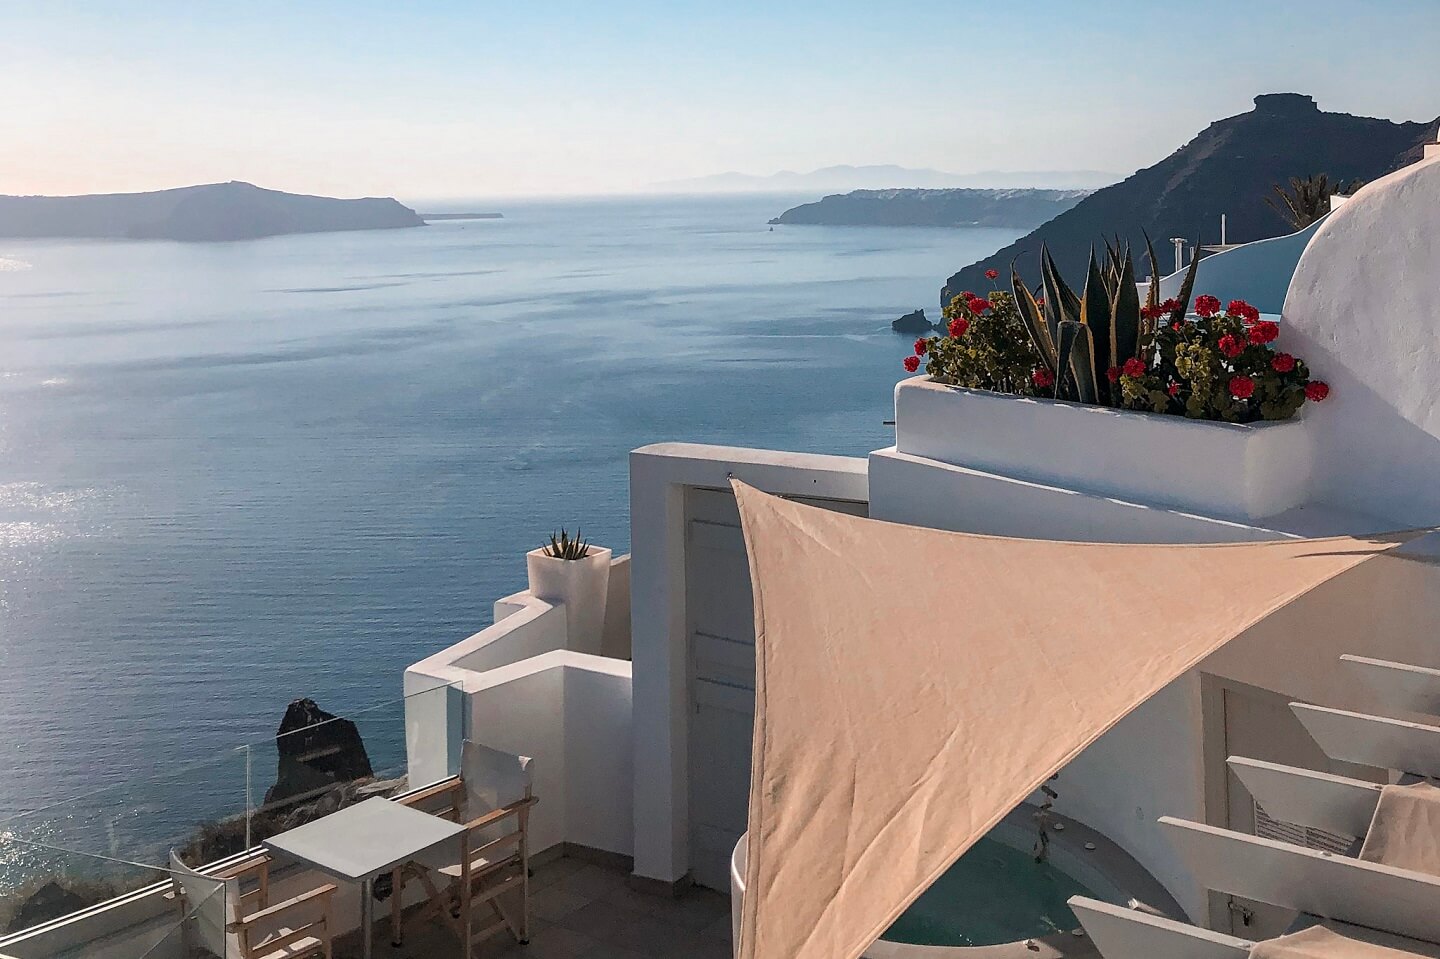 Phote from the Santorini hotel